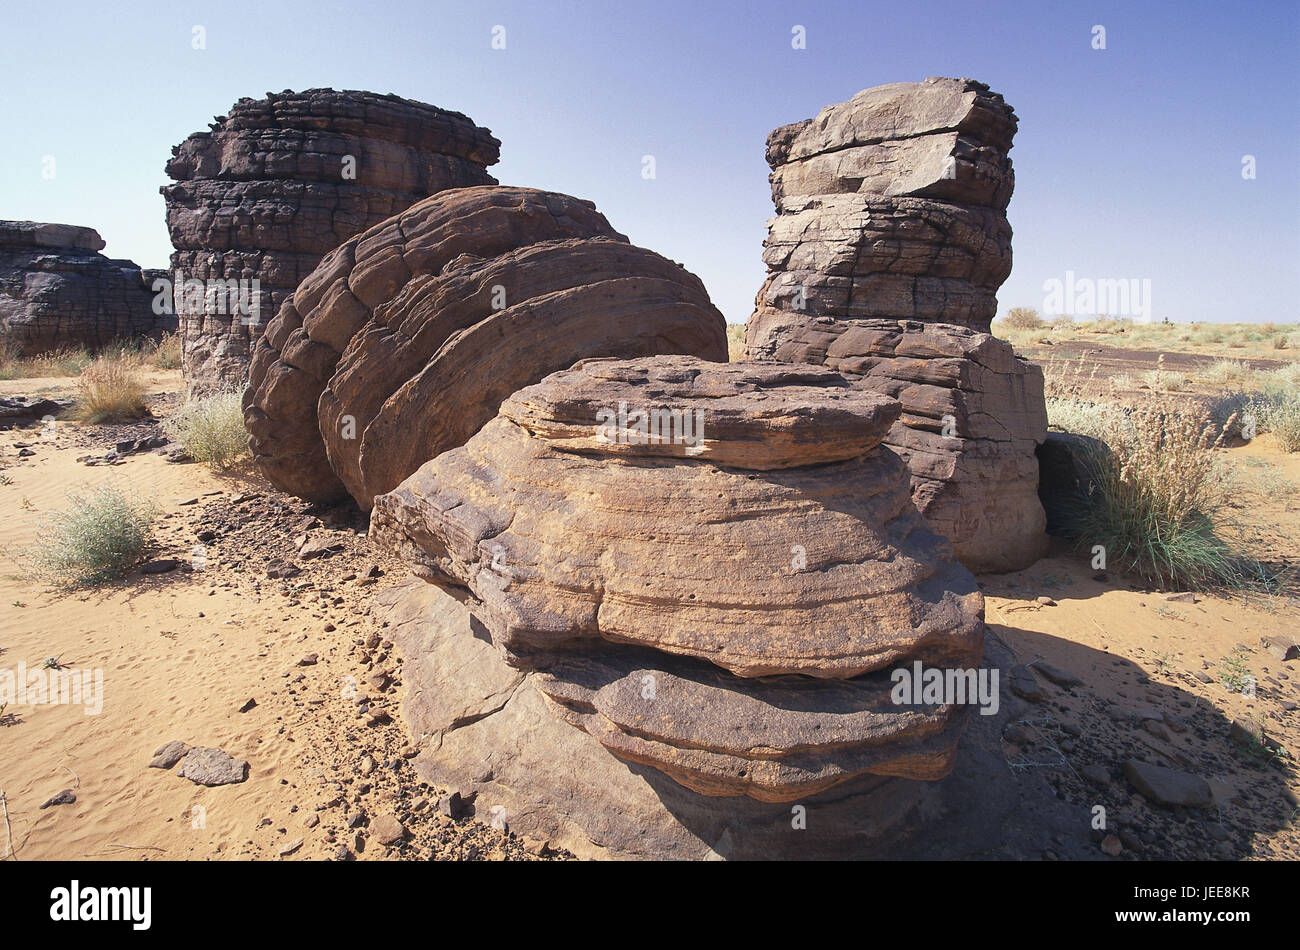 Mauritania, desert, sandstone formations, Africa, West Africa, scenery, deserted, nature, rock, sandstone rock, sandstone, formations, bile formations, erosion, geology, Stock Photo